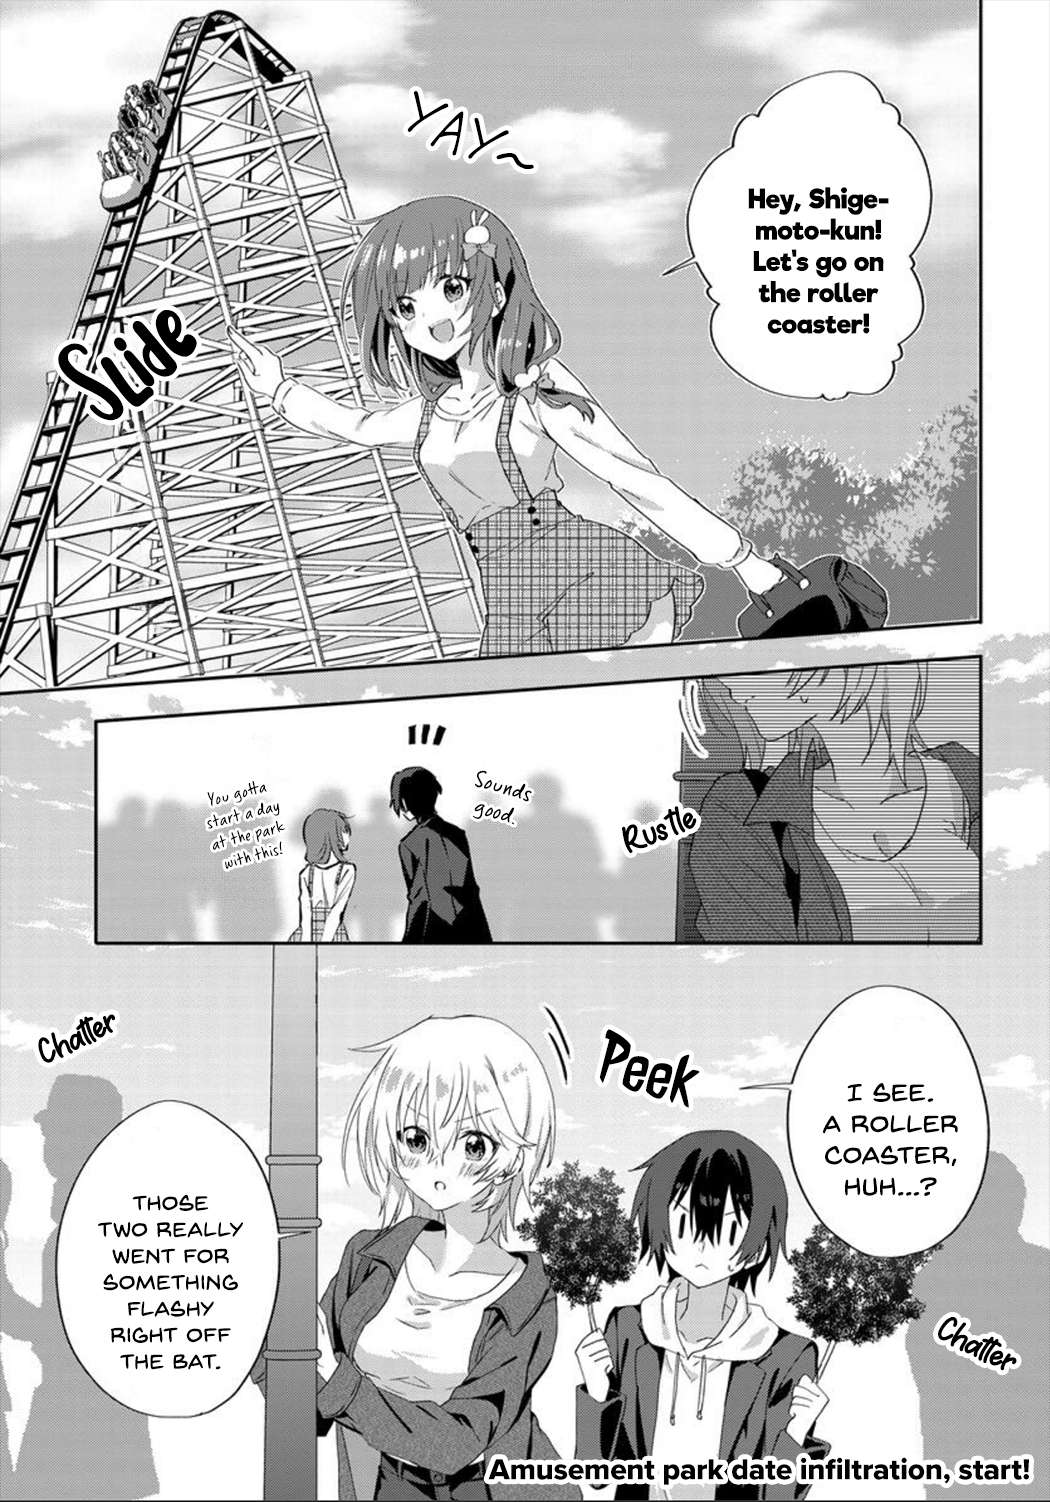 Since I’ve Entered the World of Romantic Comedy Manga, I’ll Do My Best to Make the Losing Heroine Happy. - chapter 7.1 - #1